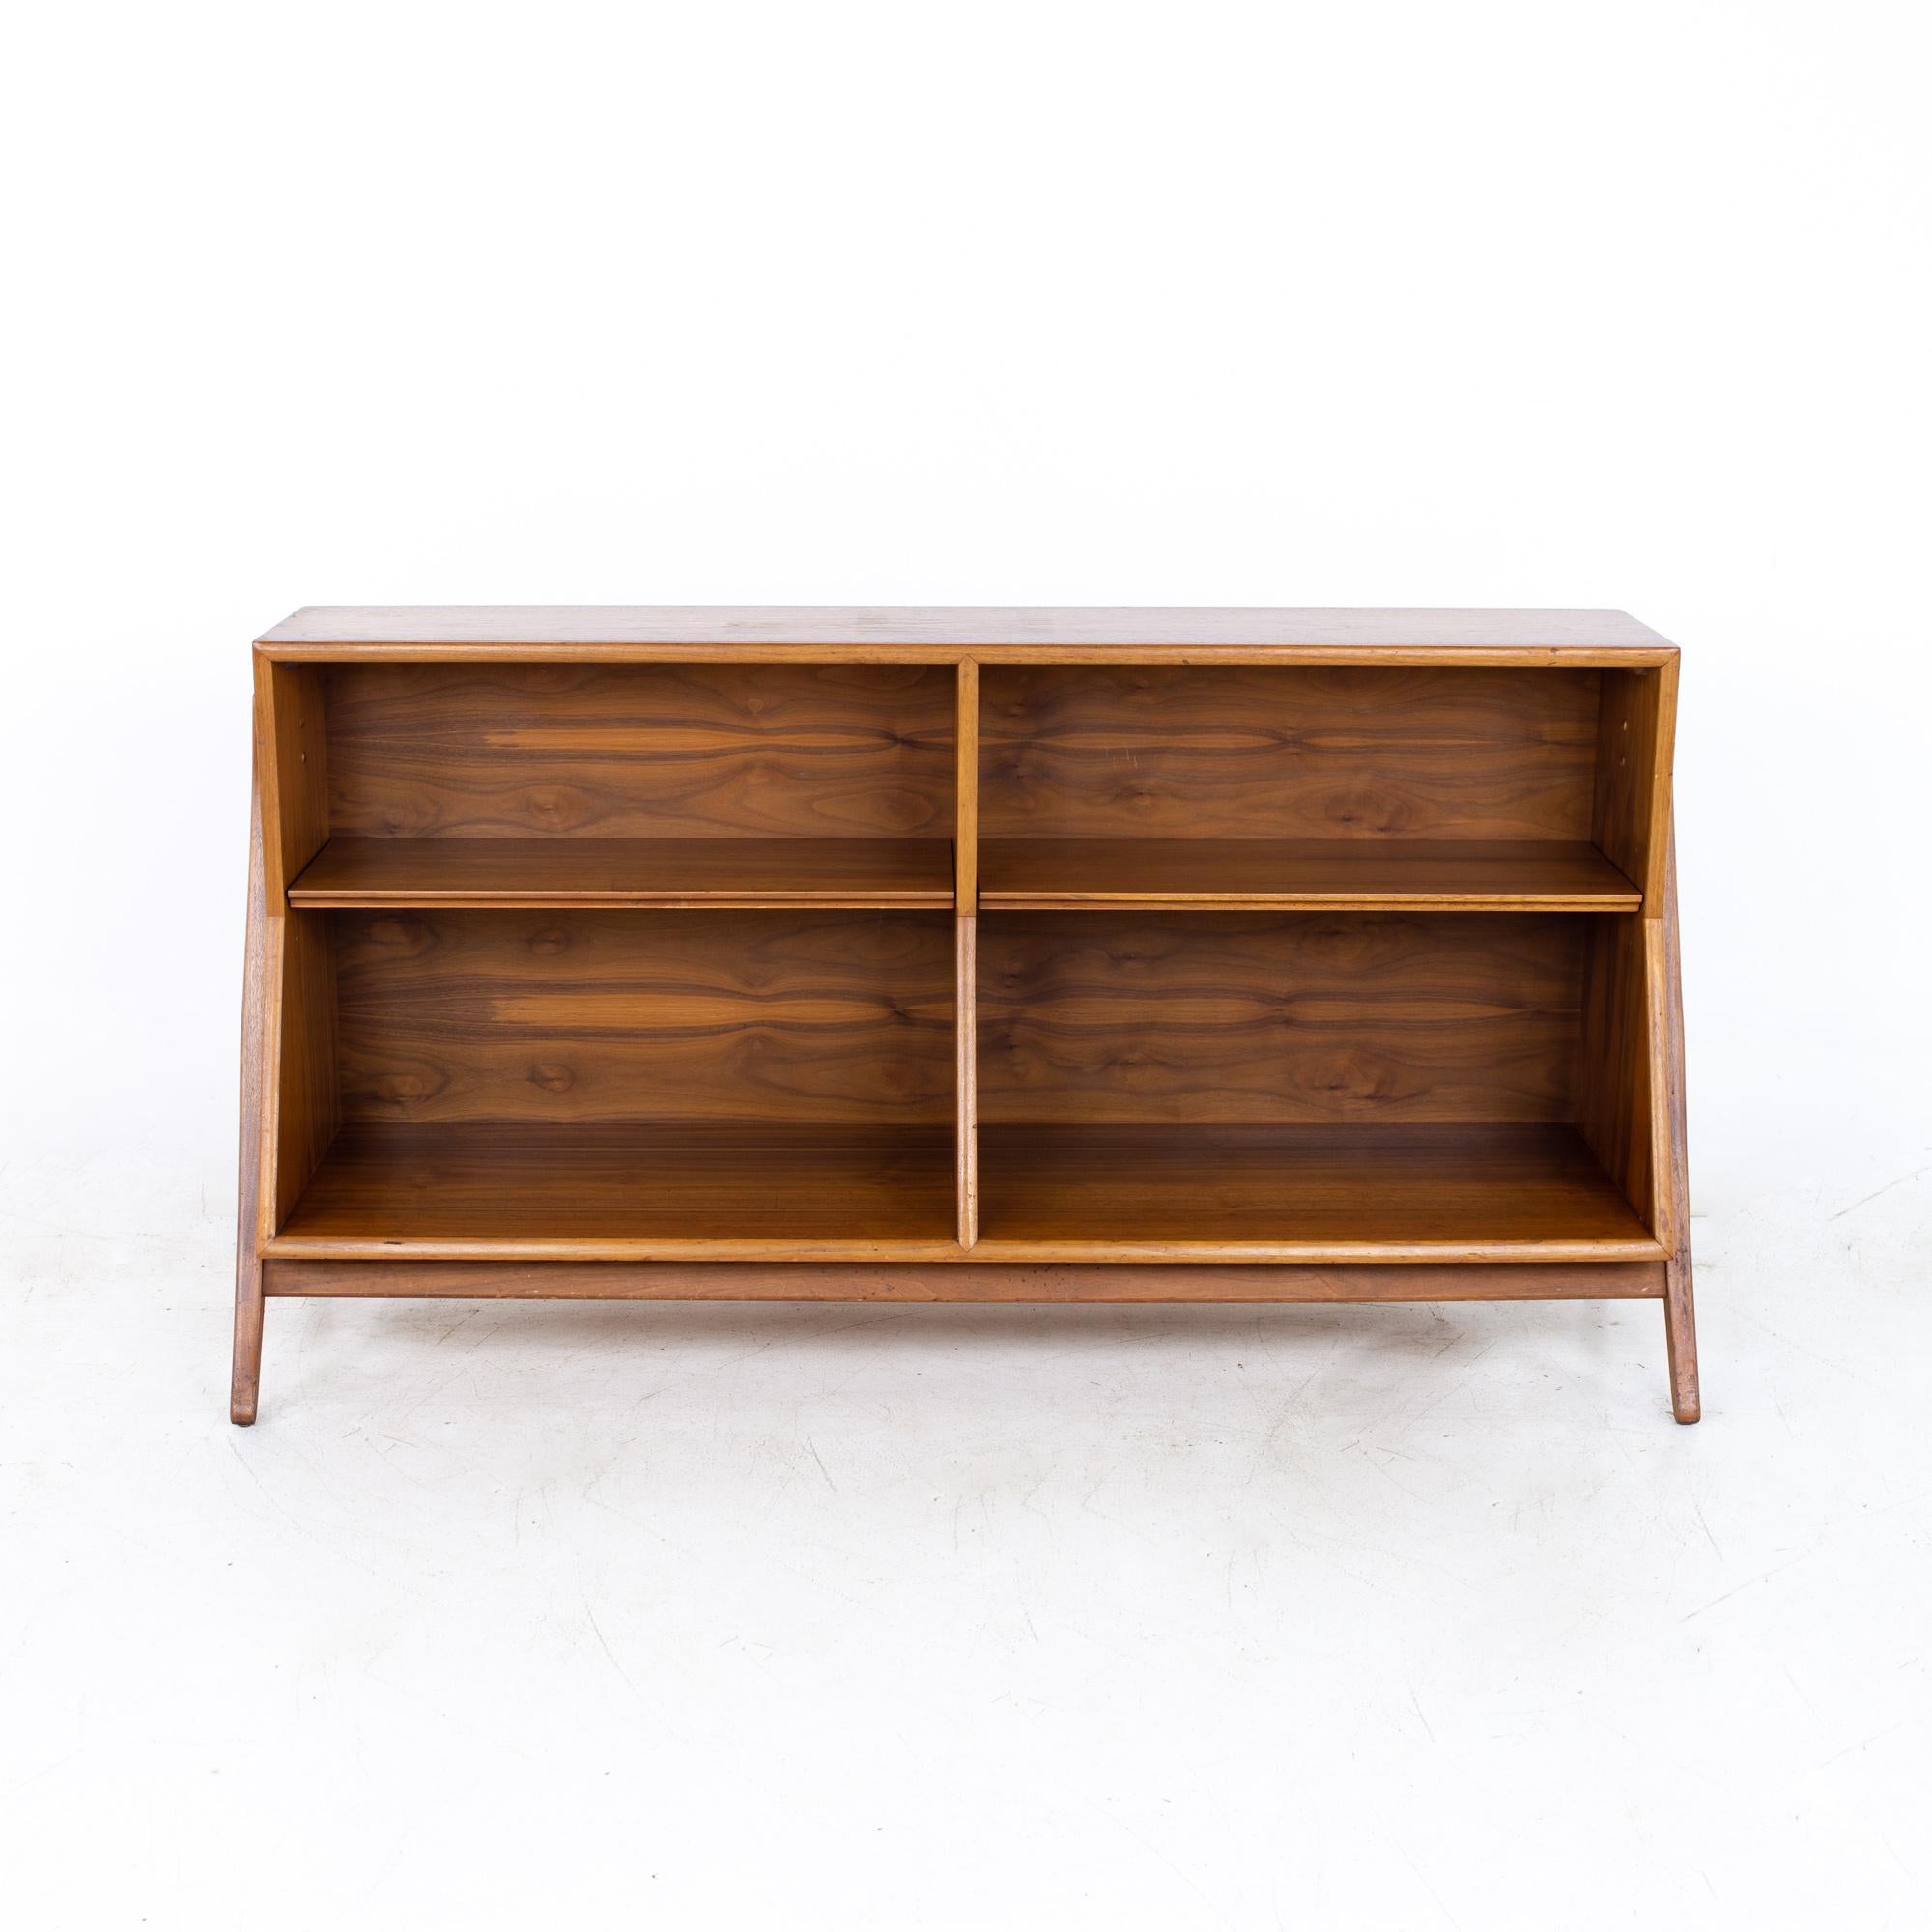 Kipp Stewart For Drexel Declaration mid century bookcase

Bookcase measures: 60.25 wide x 16.25 deep x 31 inches high

All pieces of furniture can be had in what we call restored vintage condition. That means the piece is restored upon purchase